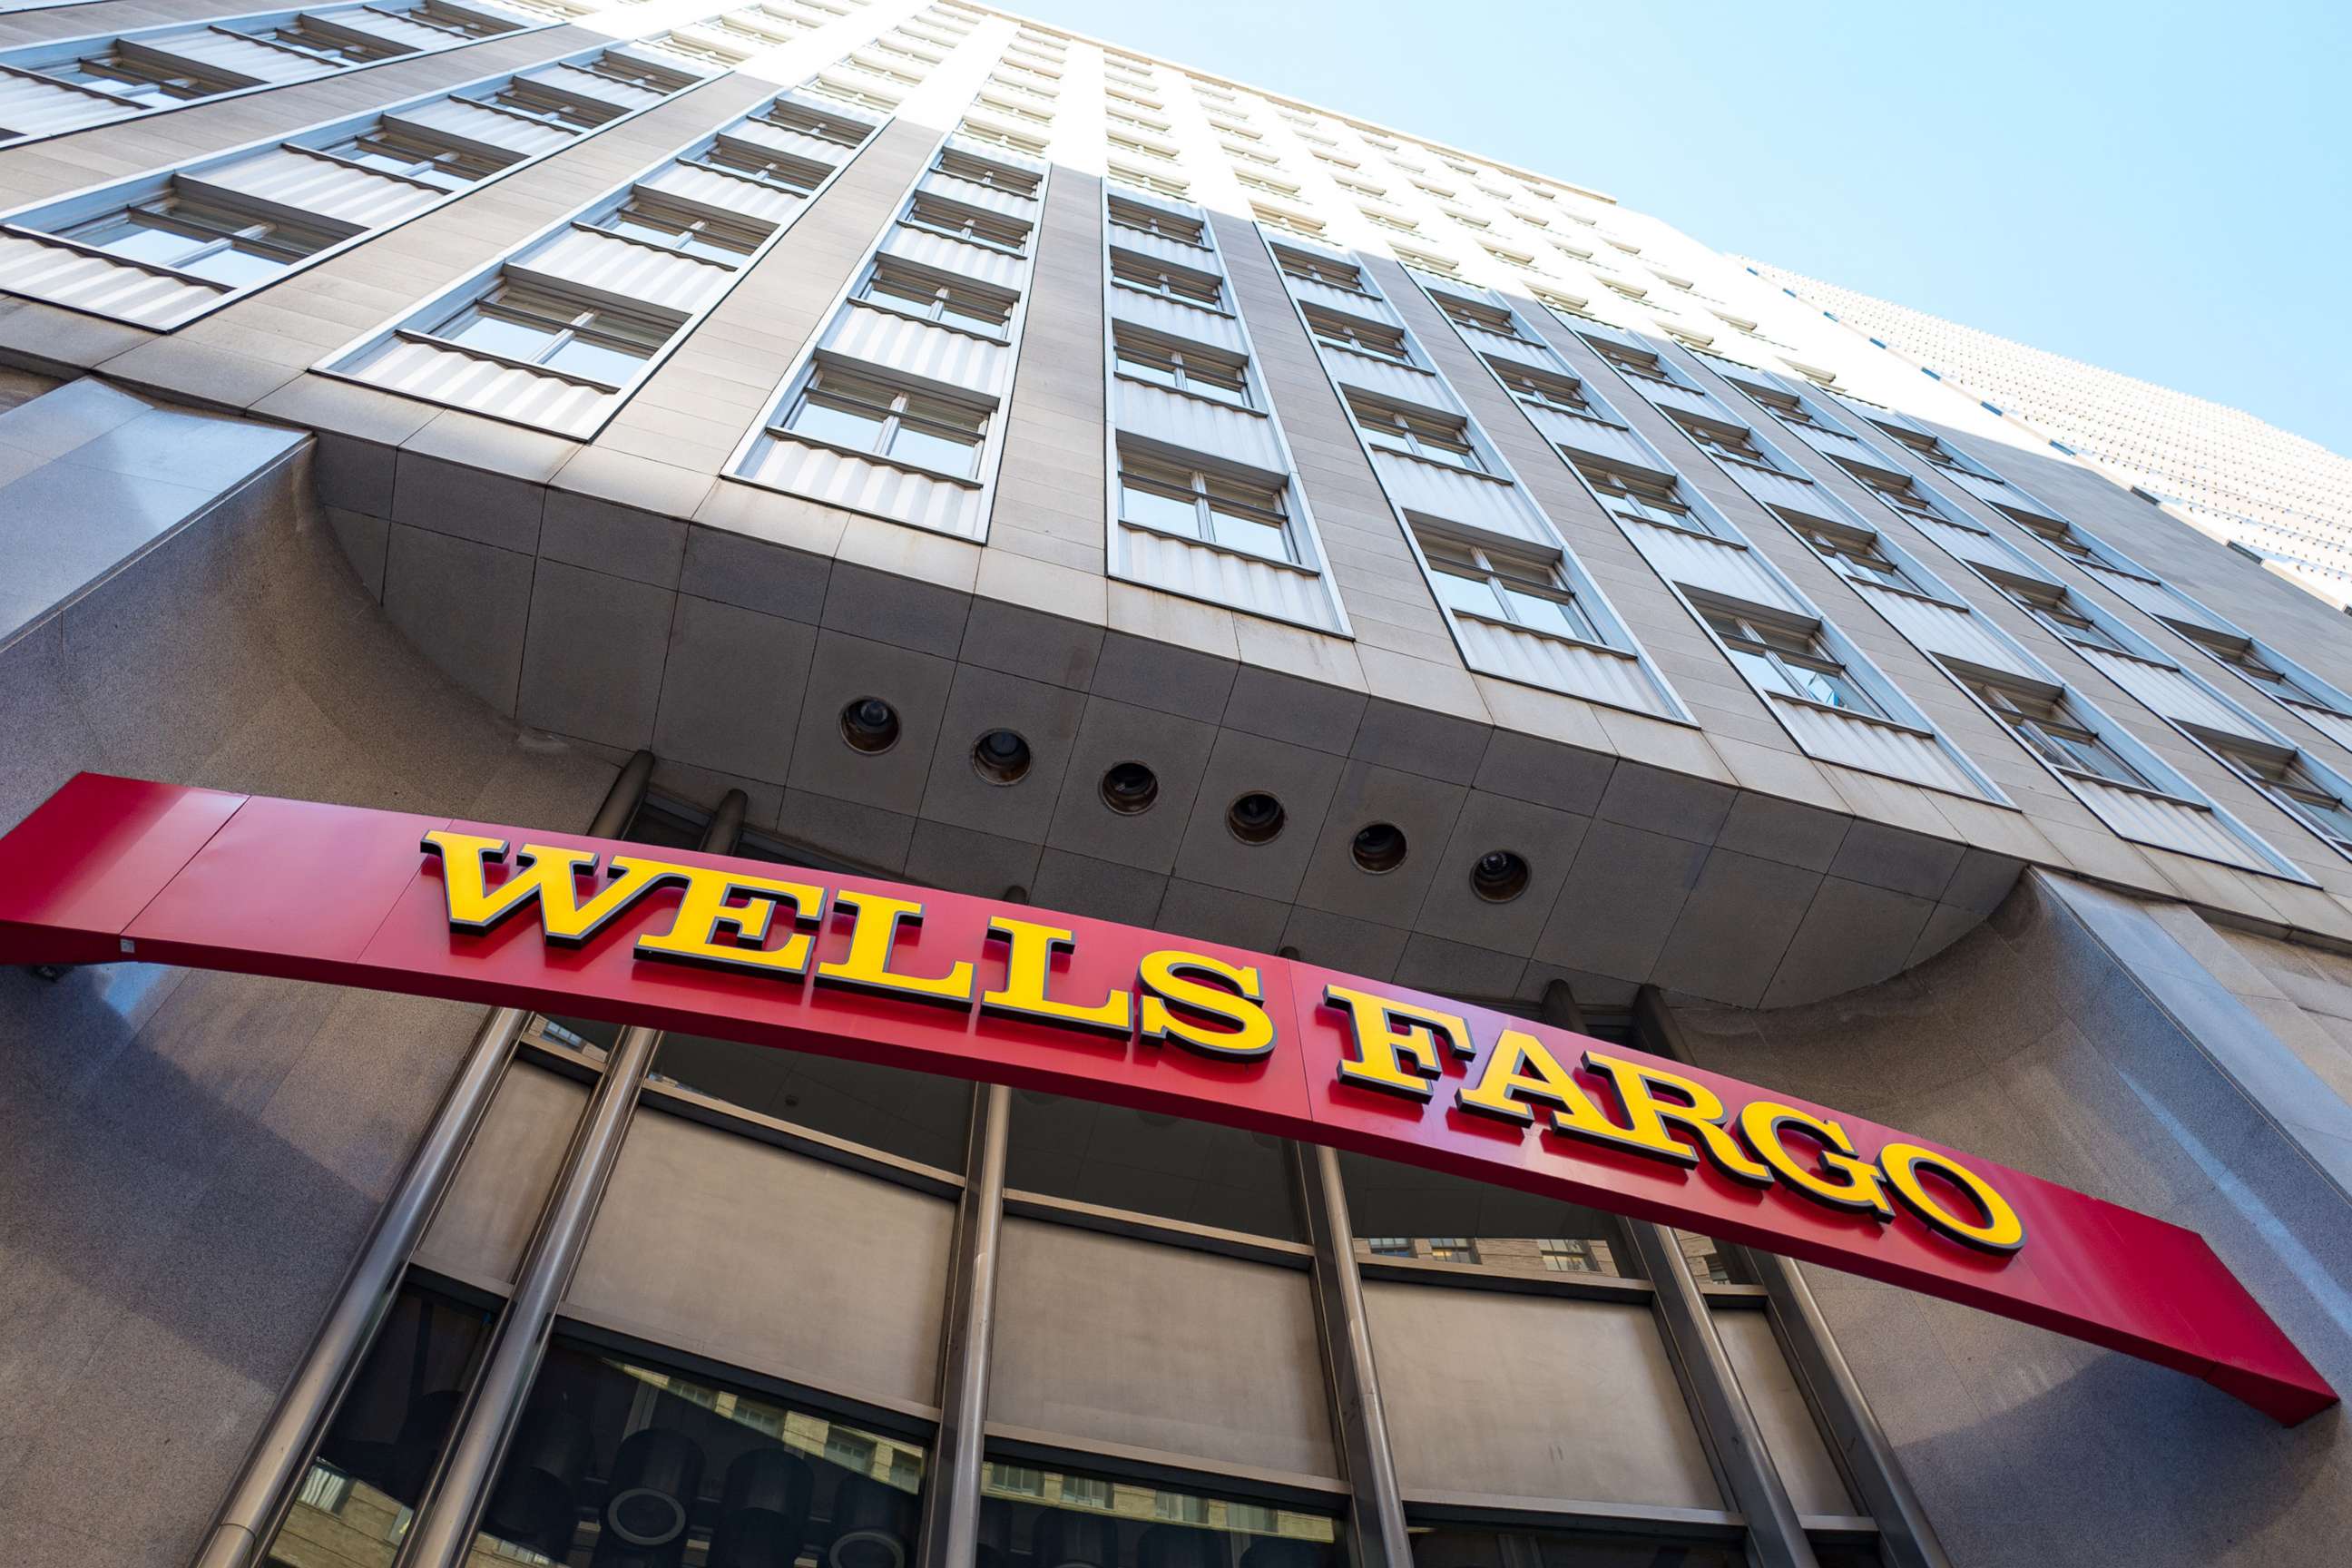 PHOTO: Signage with logo at headquarters of Wells Fargo Capital Finance, the commercial banking division of Wells Fargo Bank, in the Financial District neighborhood of San Francisco, Sept. 26, 2016.